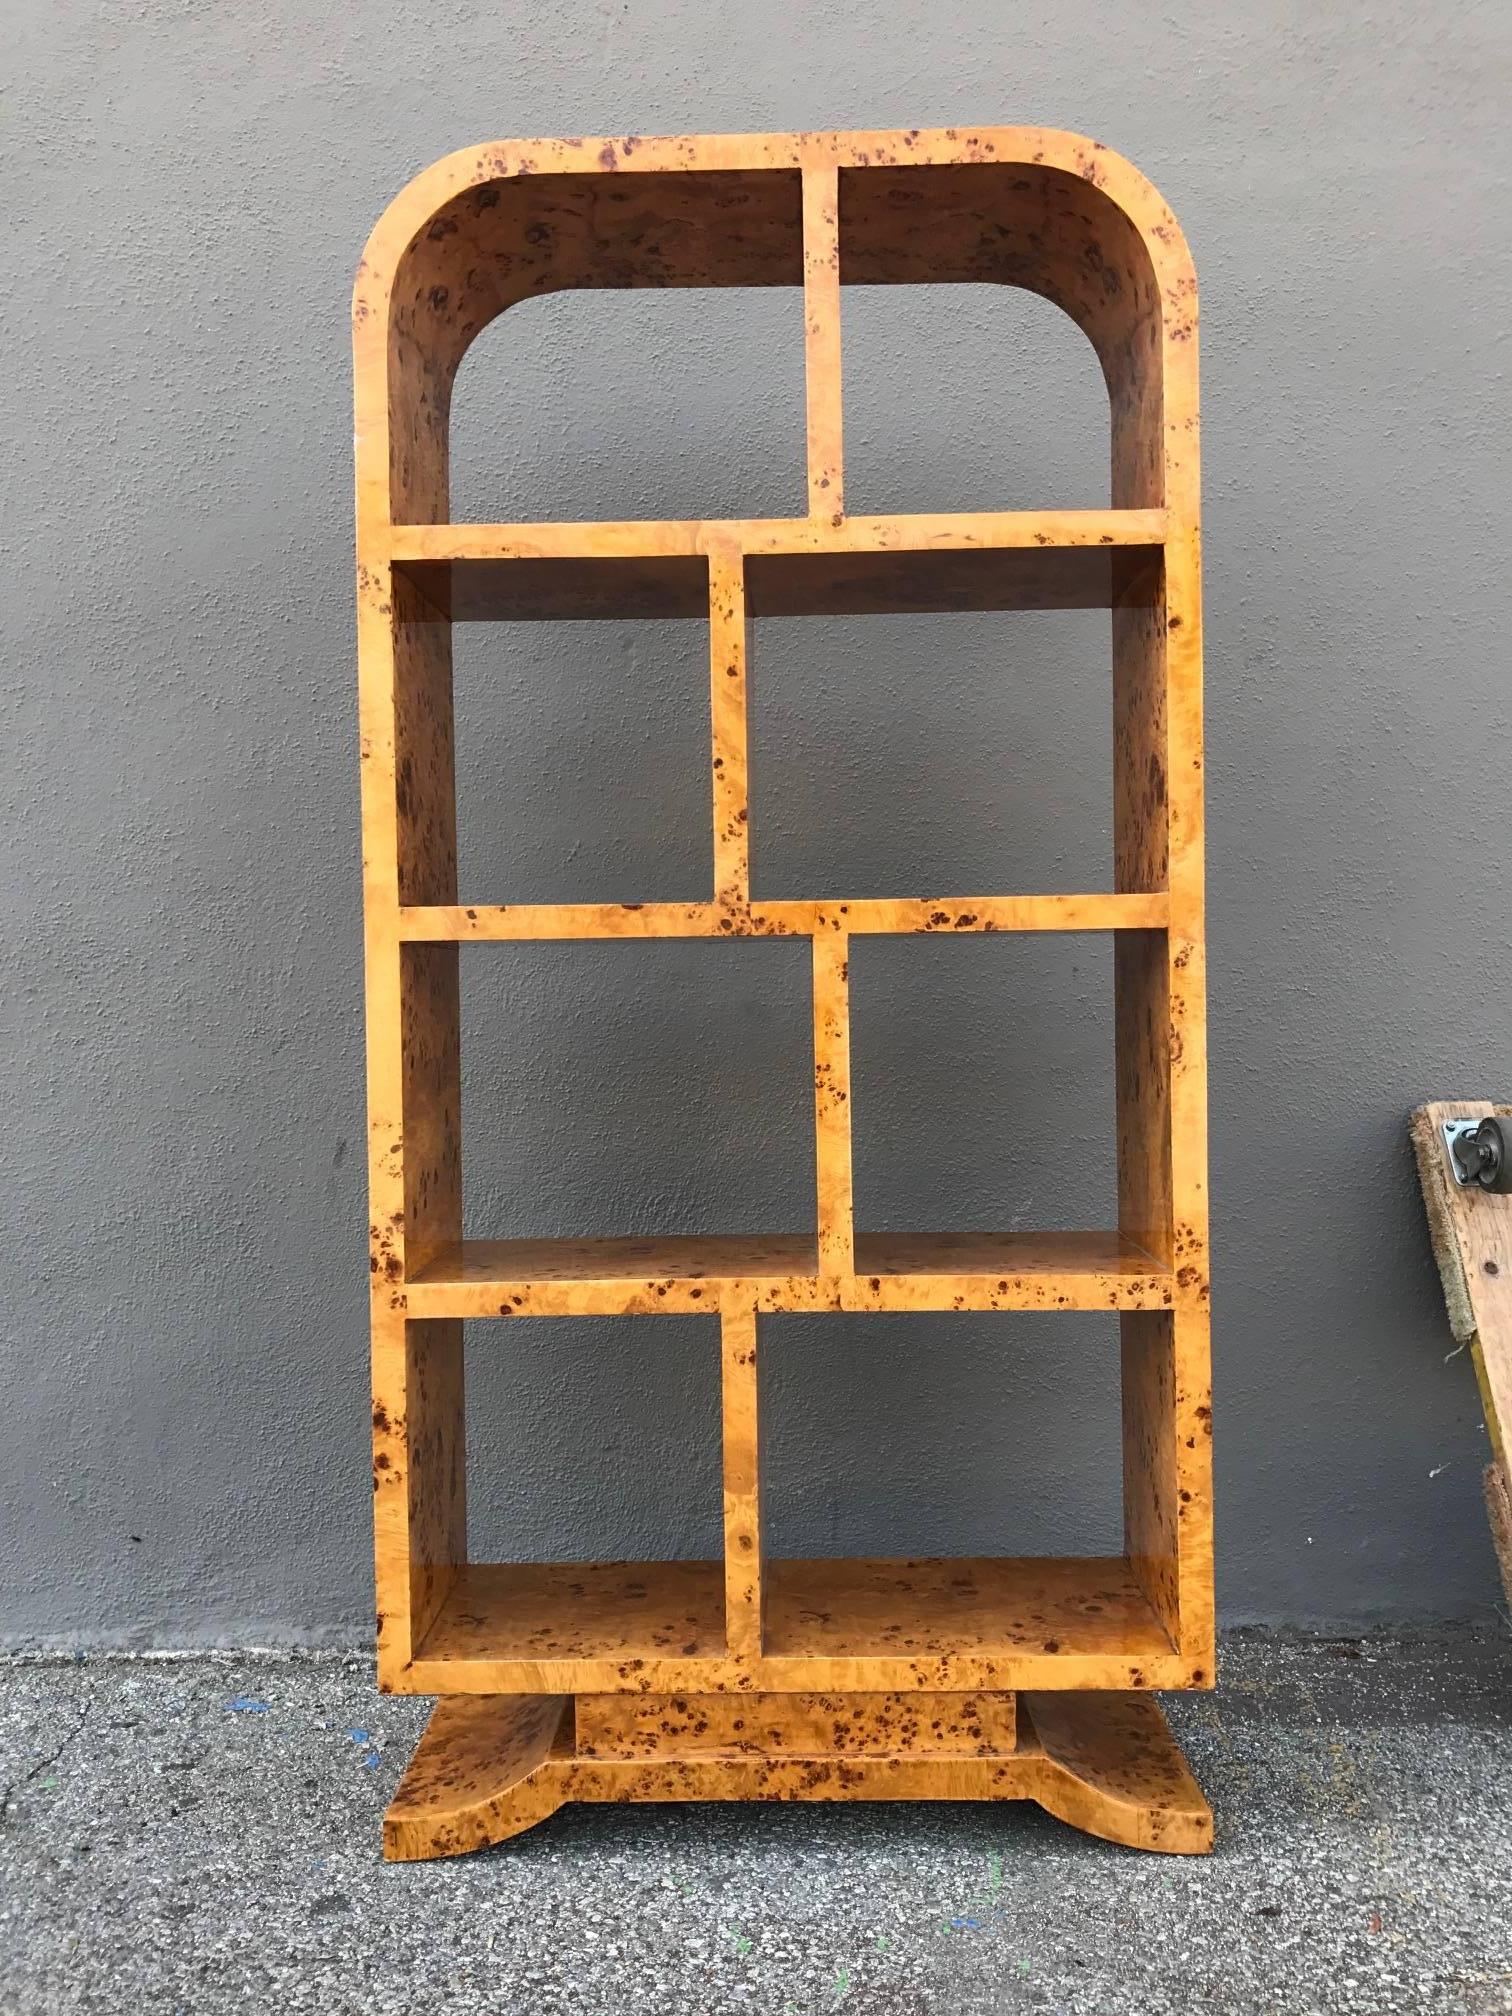 Tall and handsome design.
Also great to use as a space divider.
It's quality made of wood construction (no press-board) with birds eye maple wood veneer.
It's in the original vintage condition with barely visible ware / patina consistent with